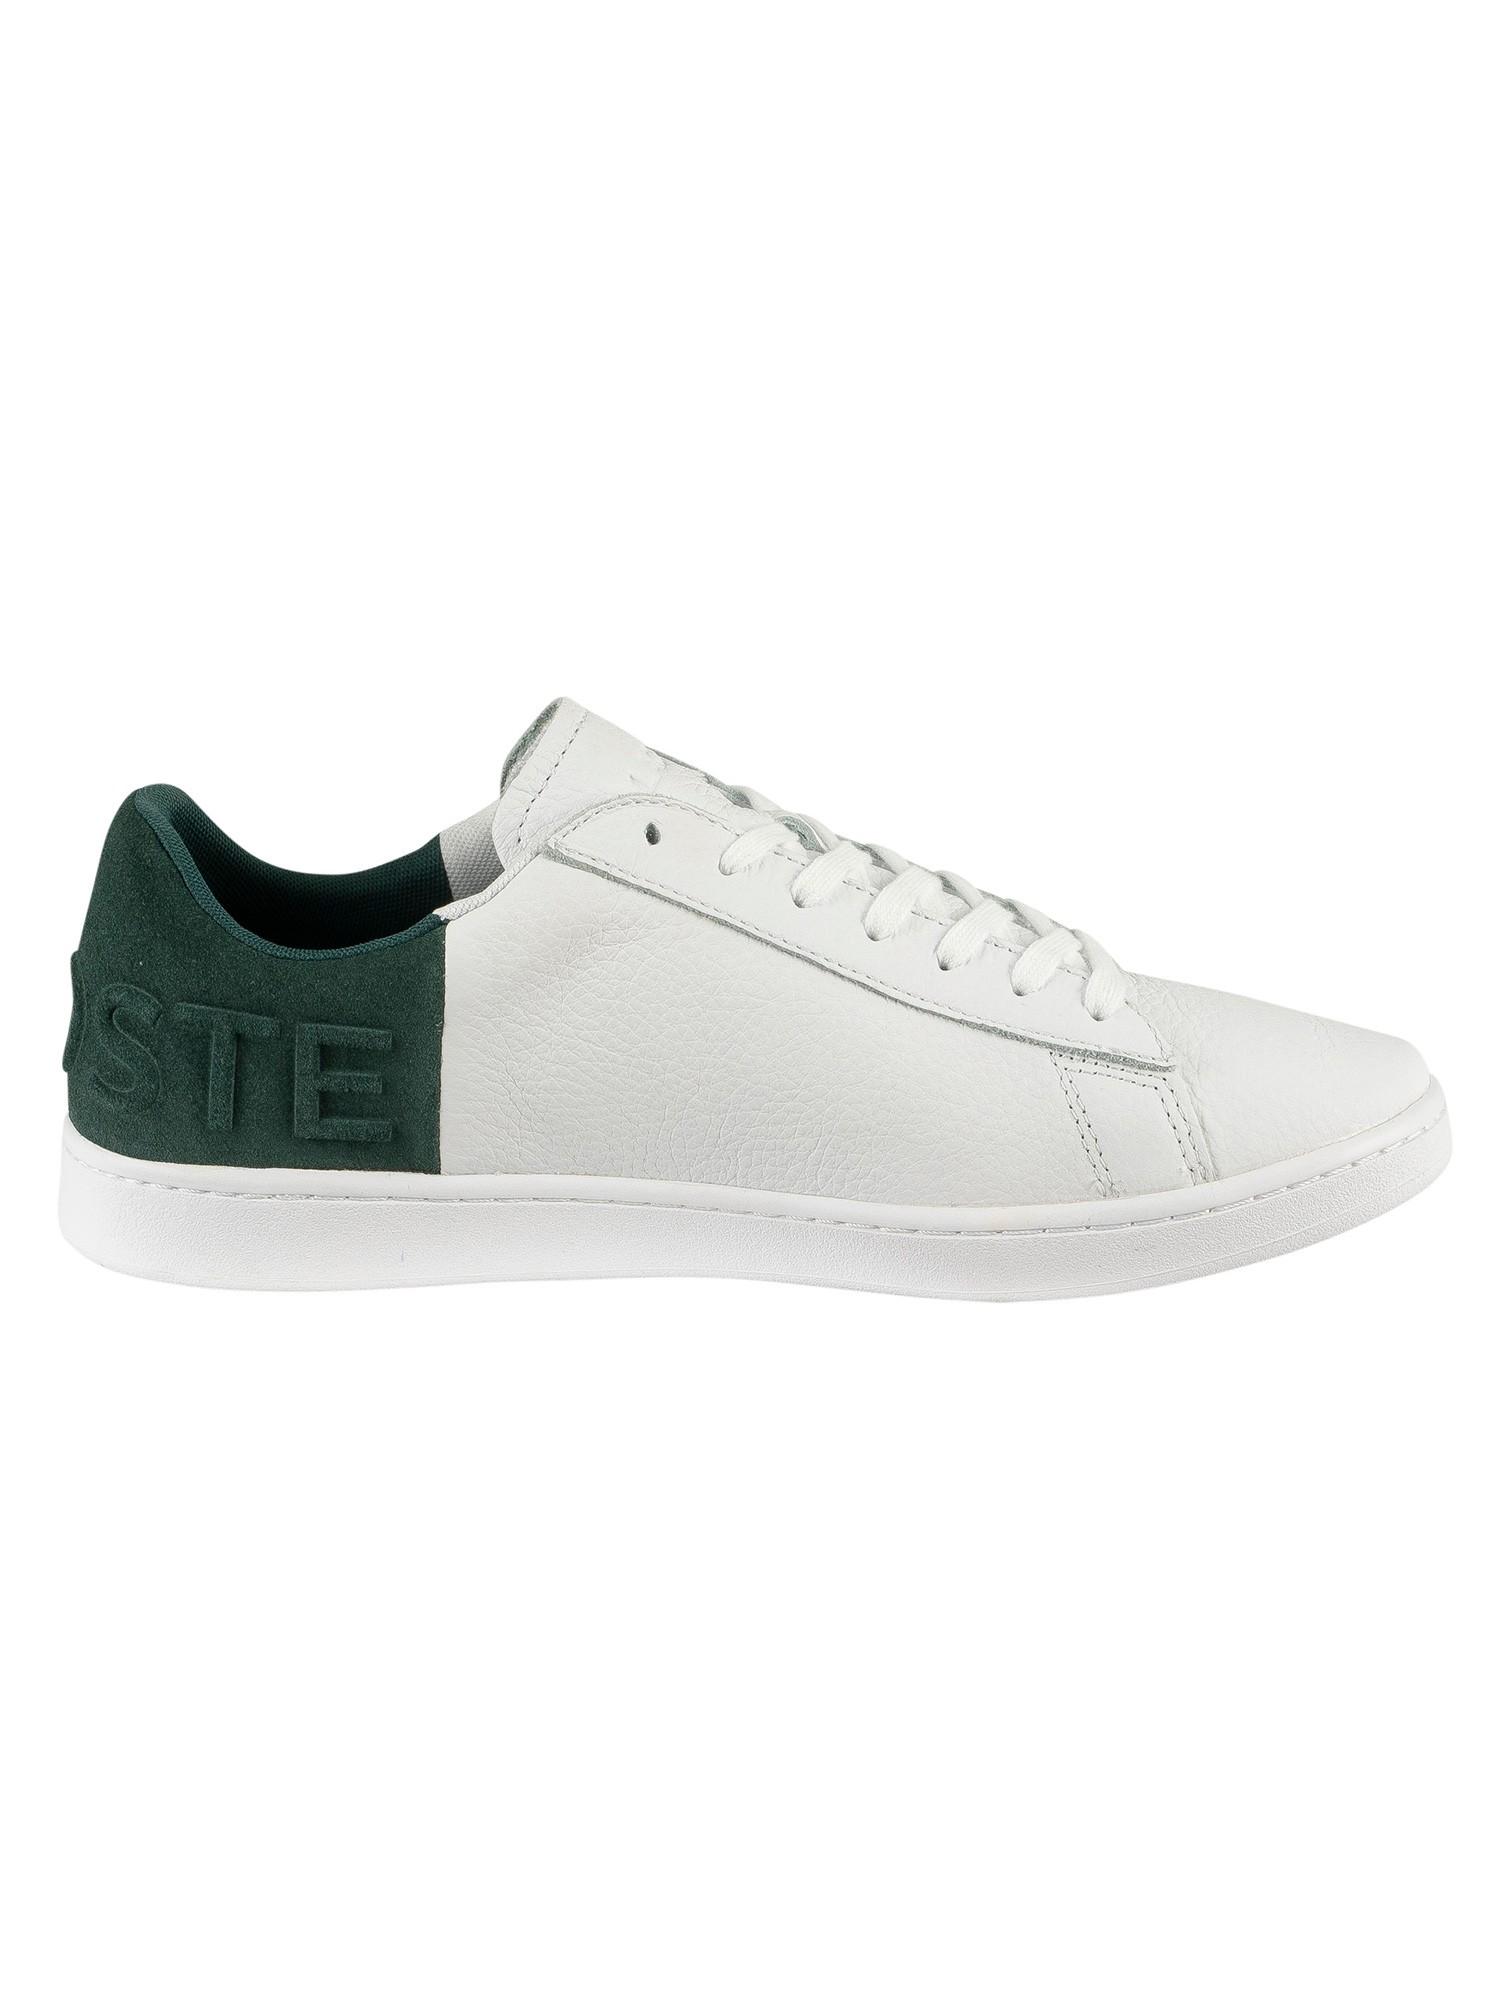 Lacoste Carnaby Evo 419 Sma Leather Trainers in White for Men | Lyst